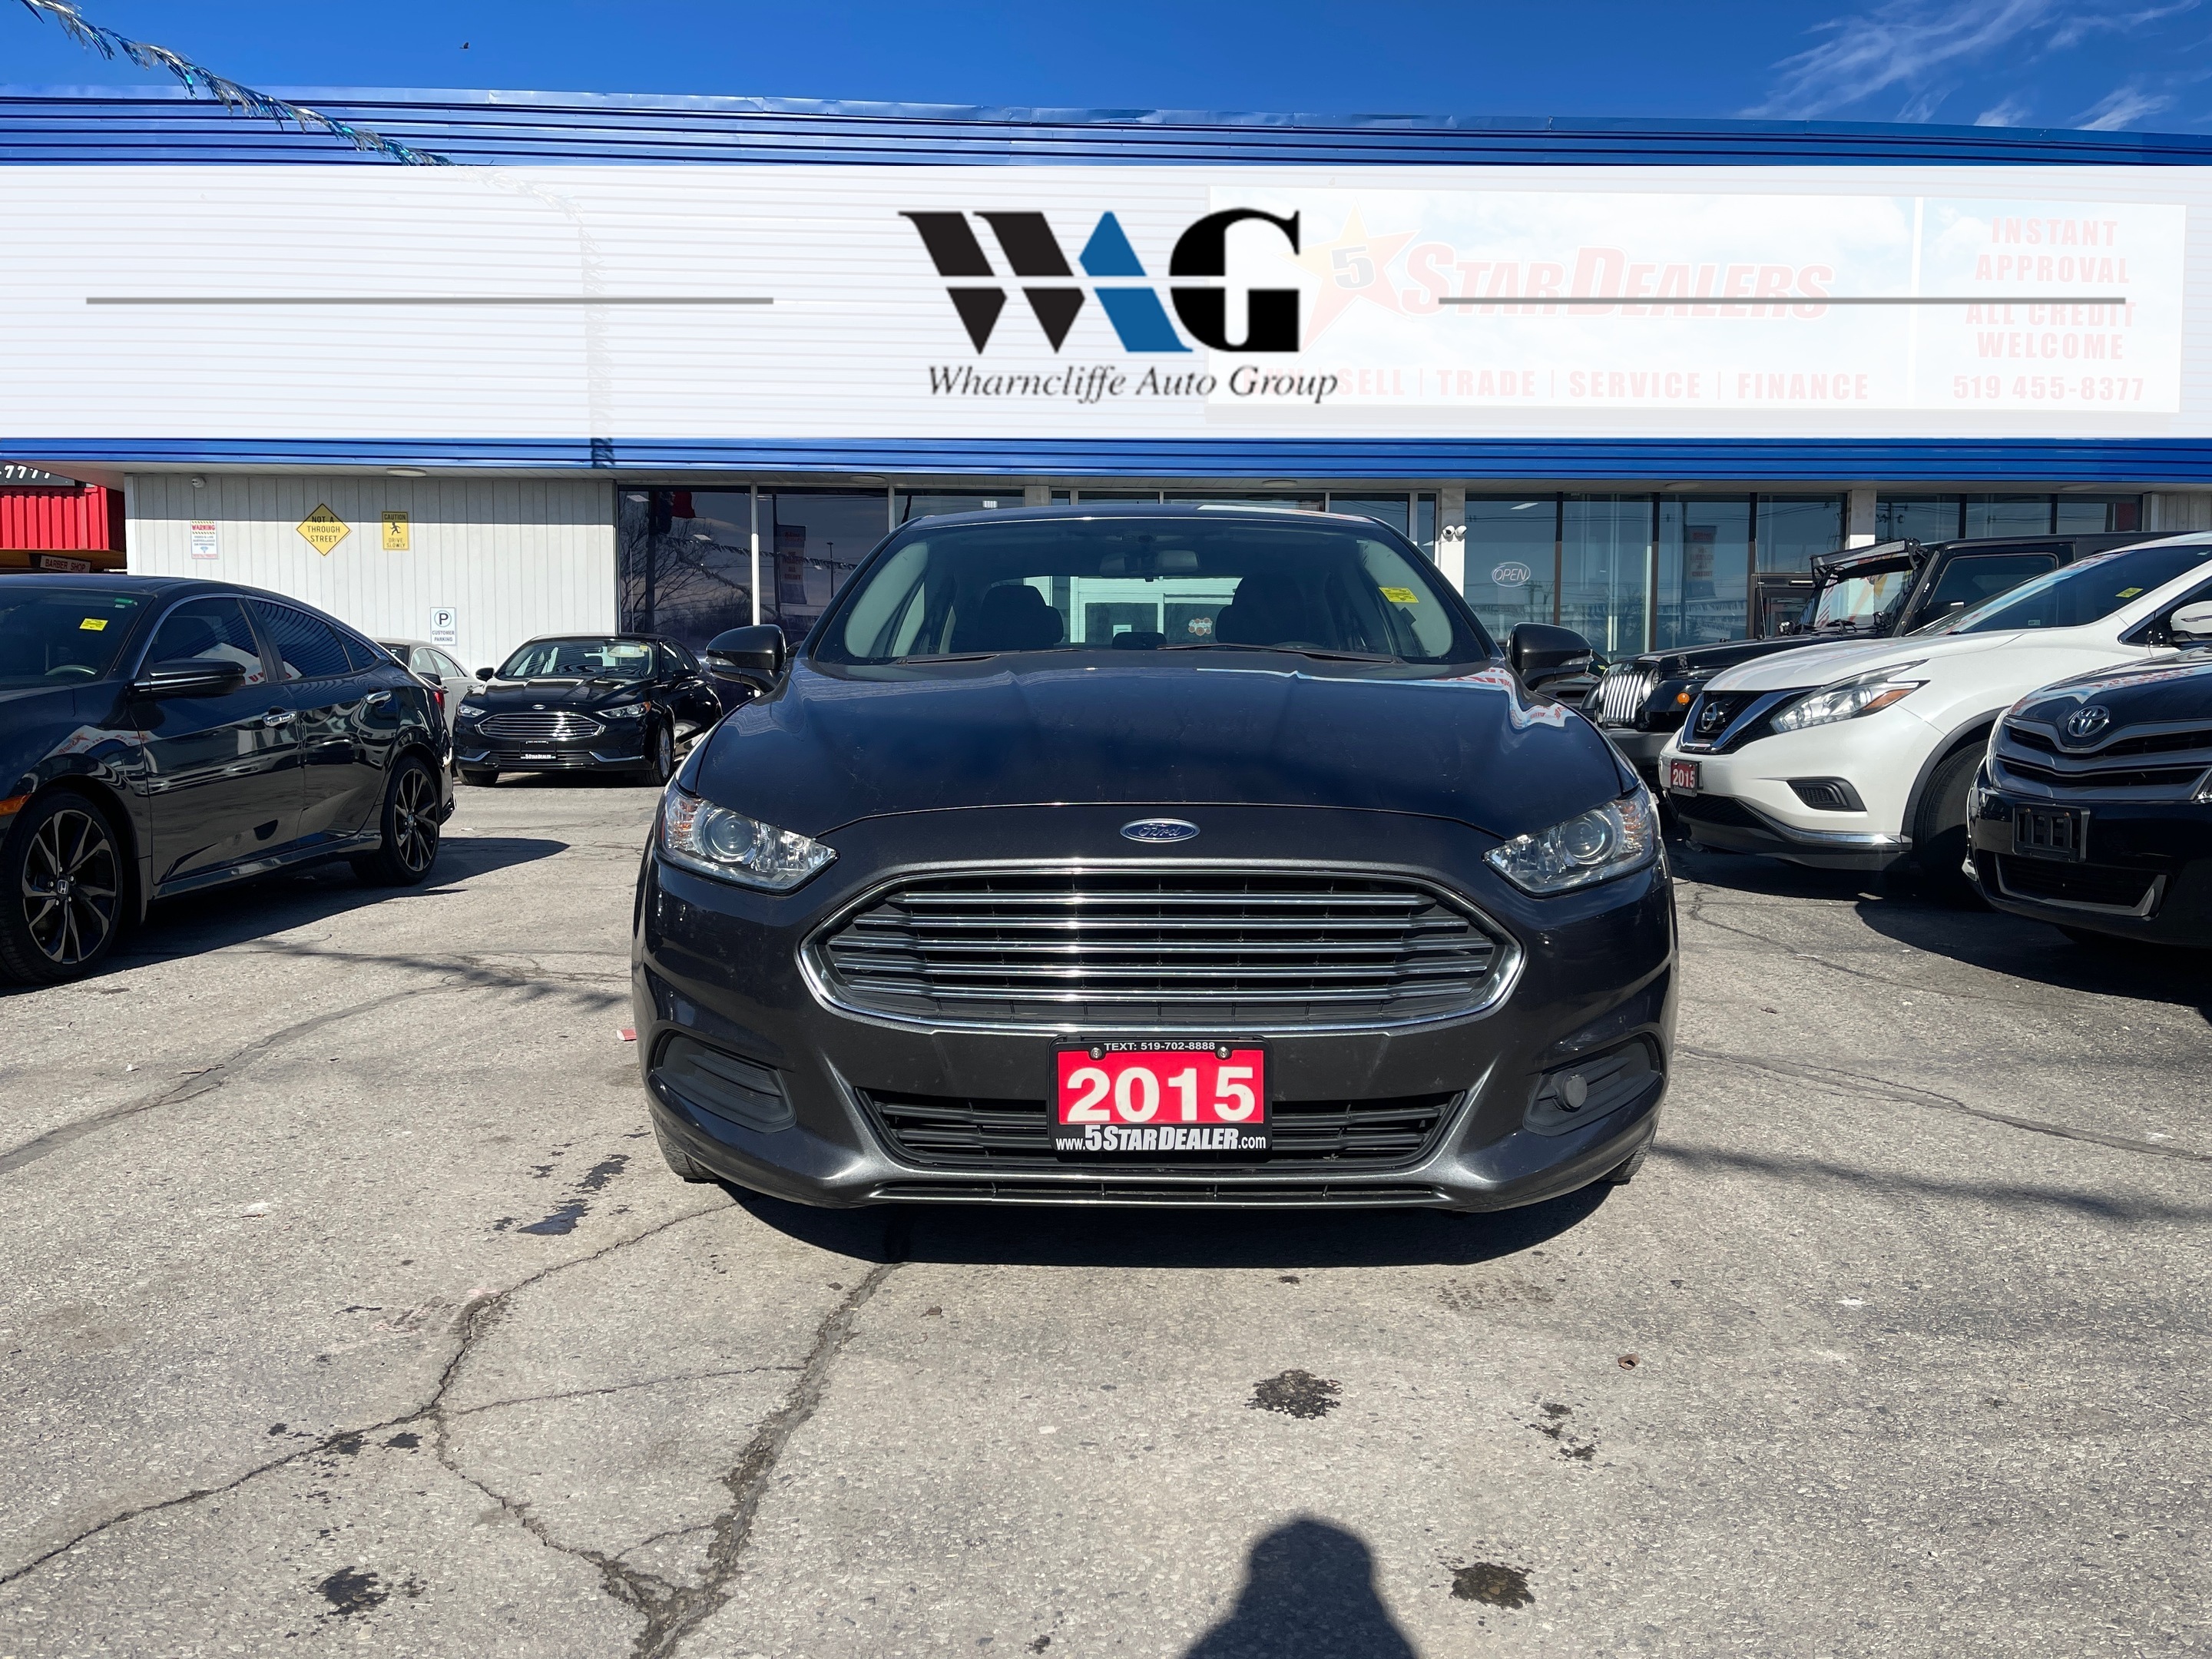 2015 Ford Fusion EXCELLENT CONDITION! LOADED! WE FINANCE ALL CREDIT